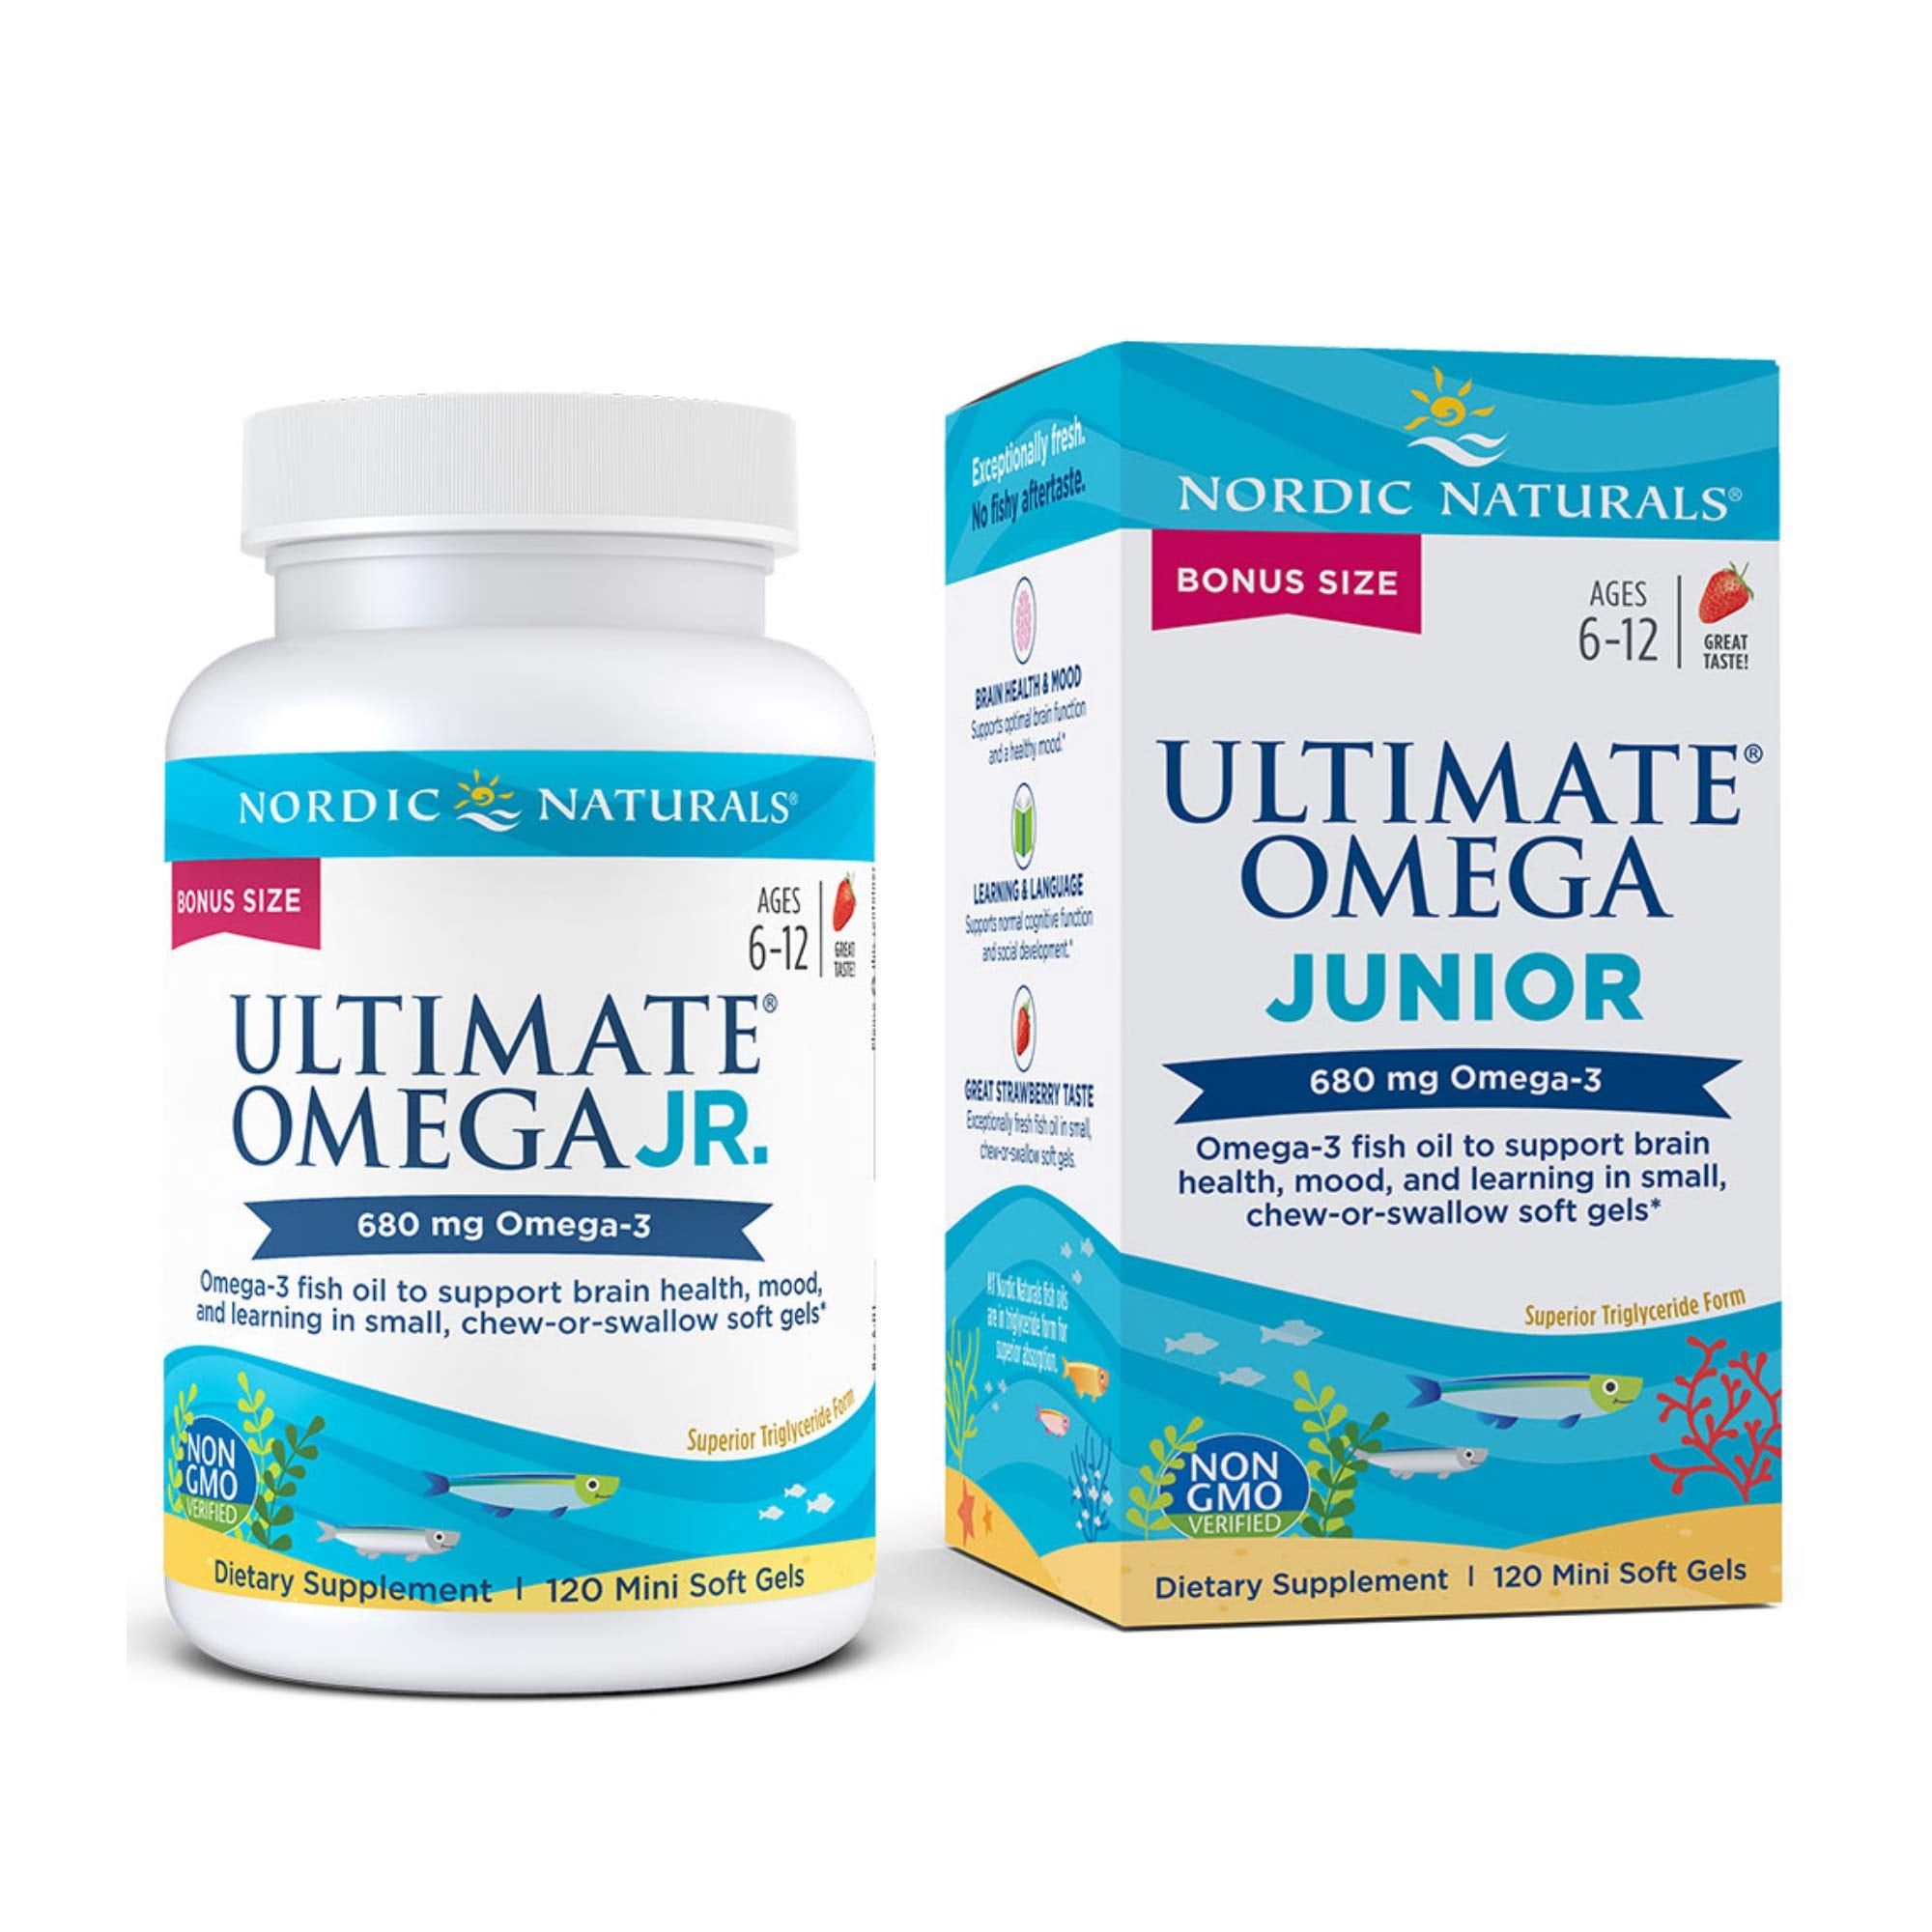 Nordic Naturals Ultimate Omega Jr, Strawberry - 120 Mini Soft Gels - 680 Total Omega-3s with EPA & DHA - Brain Health, Mood, Learning - Non-GMO - 60 Servings